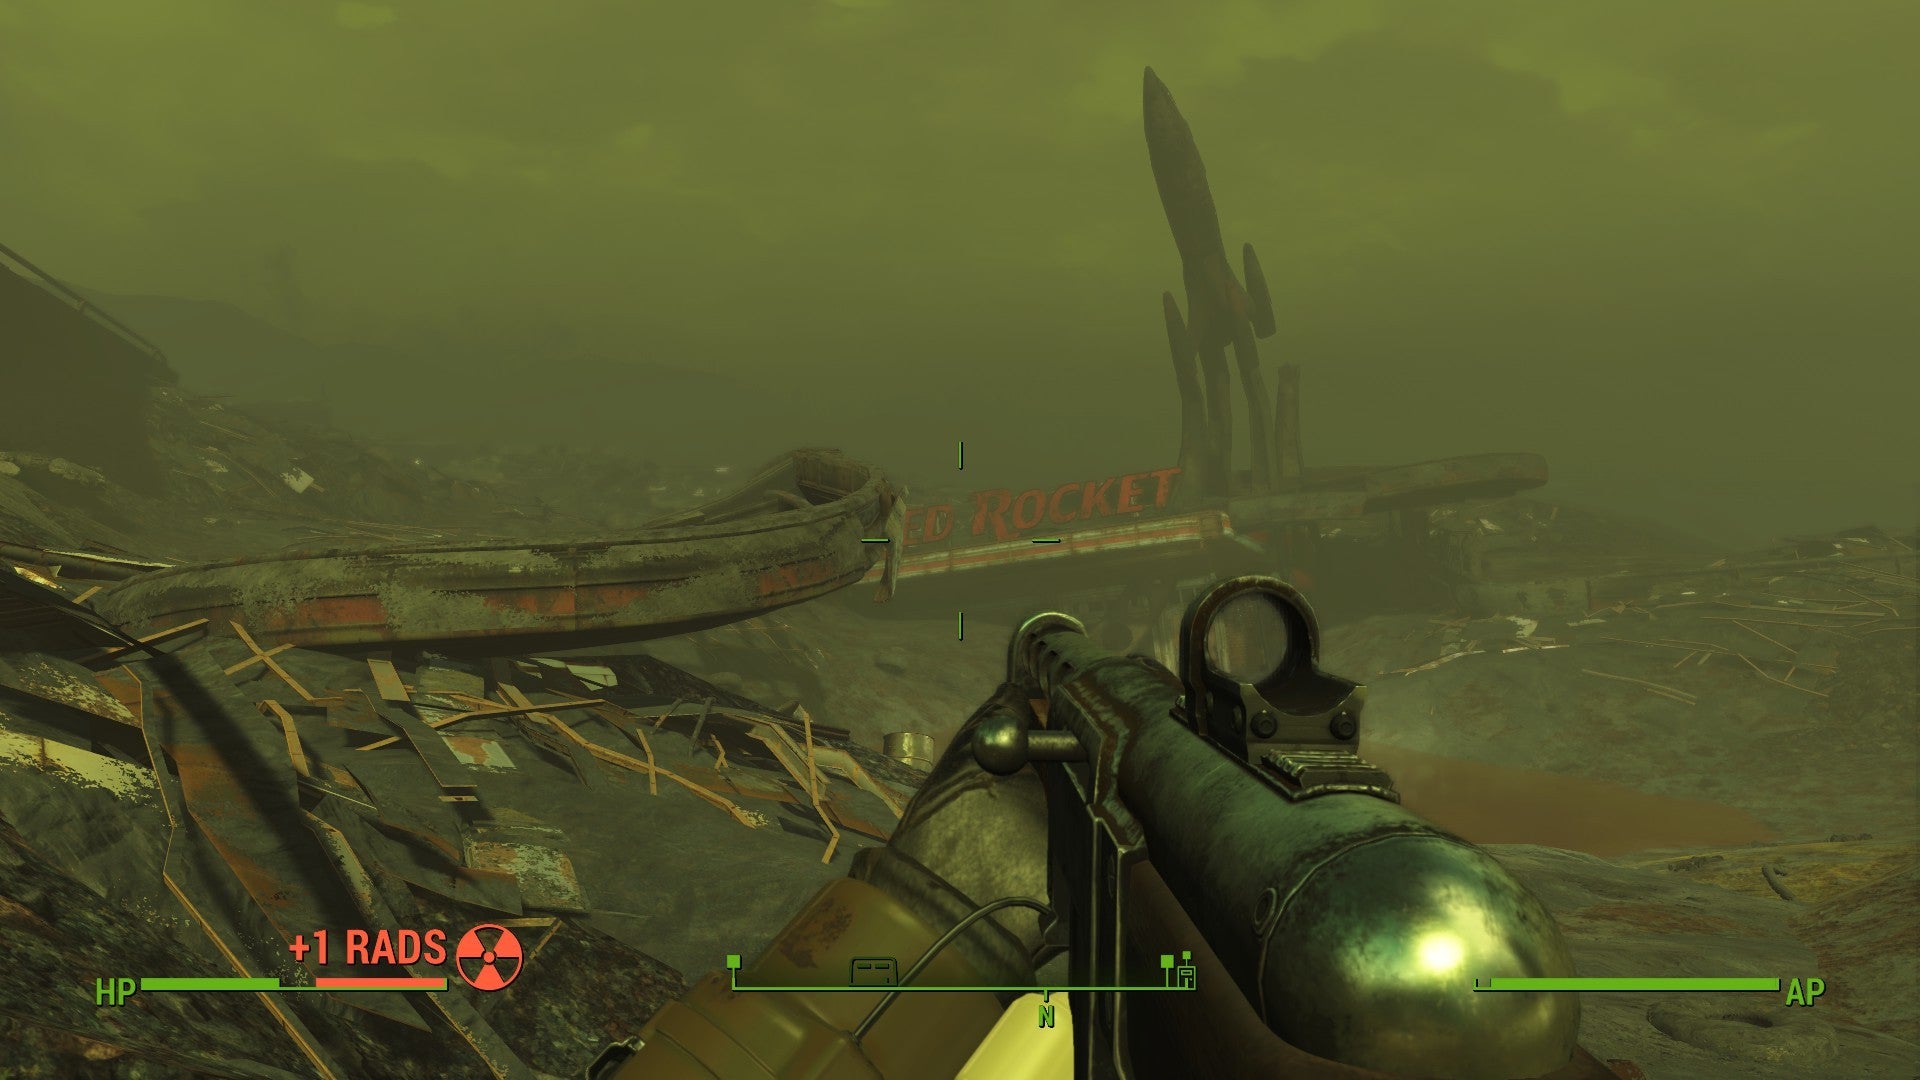 Night vision in fallout 4 фото 30